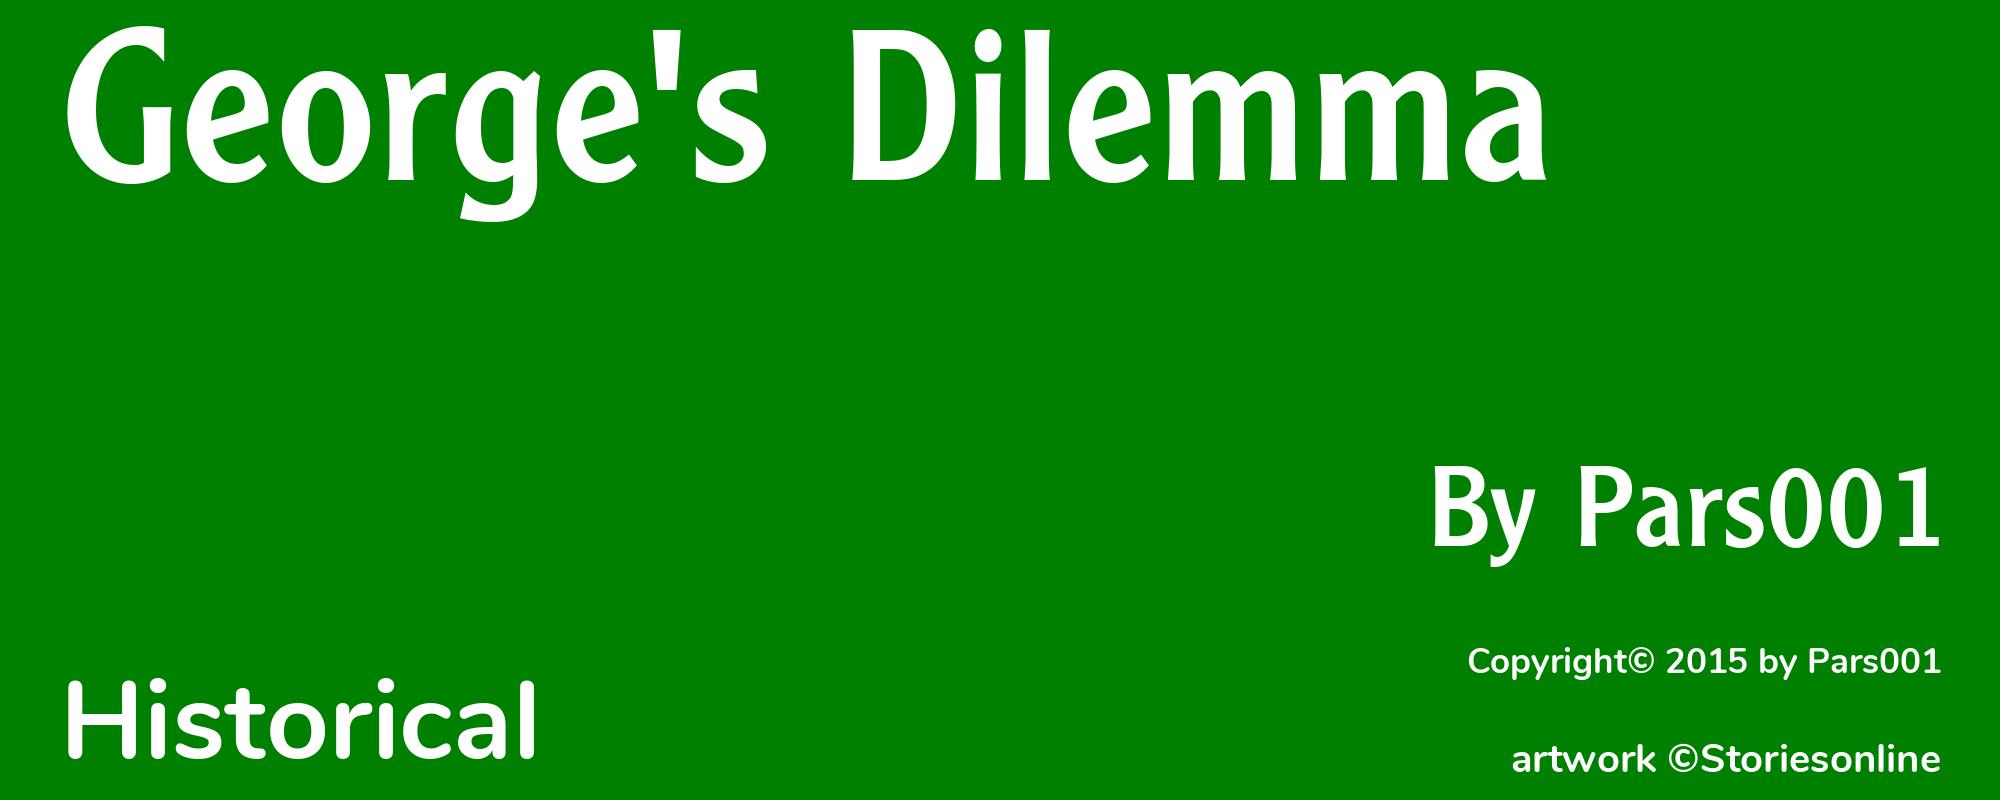 George's Dilemma - Cover